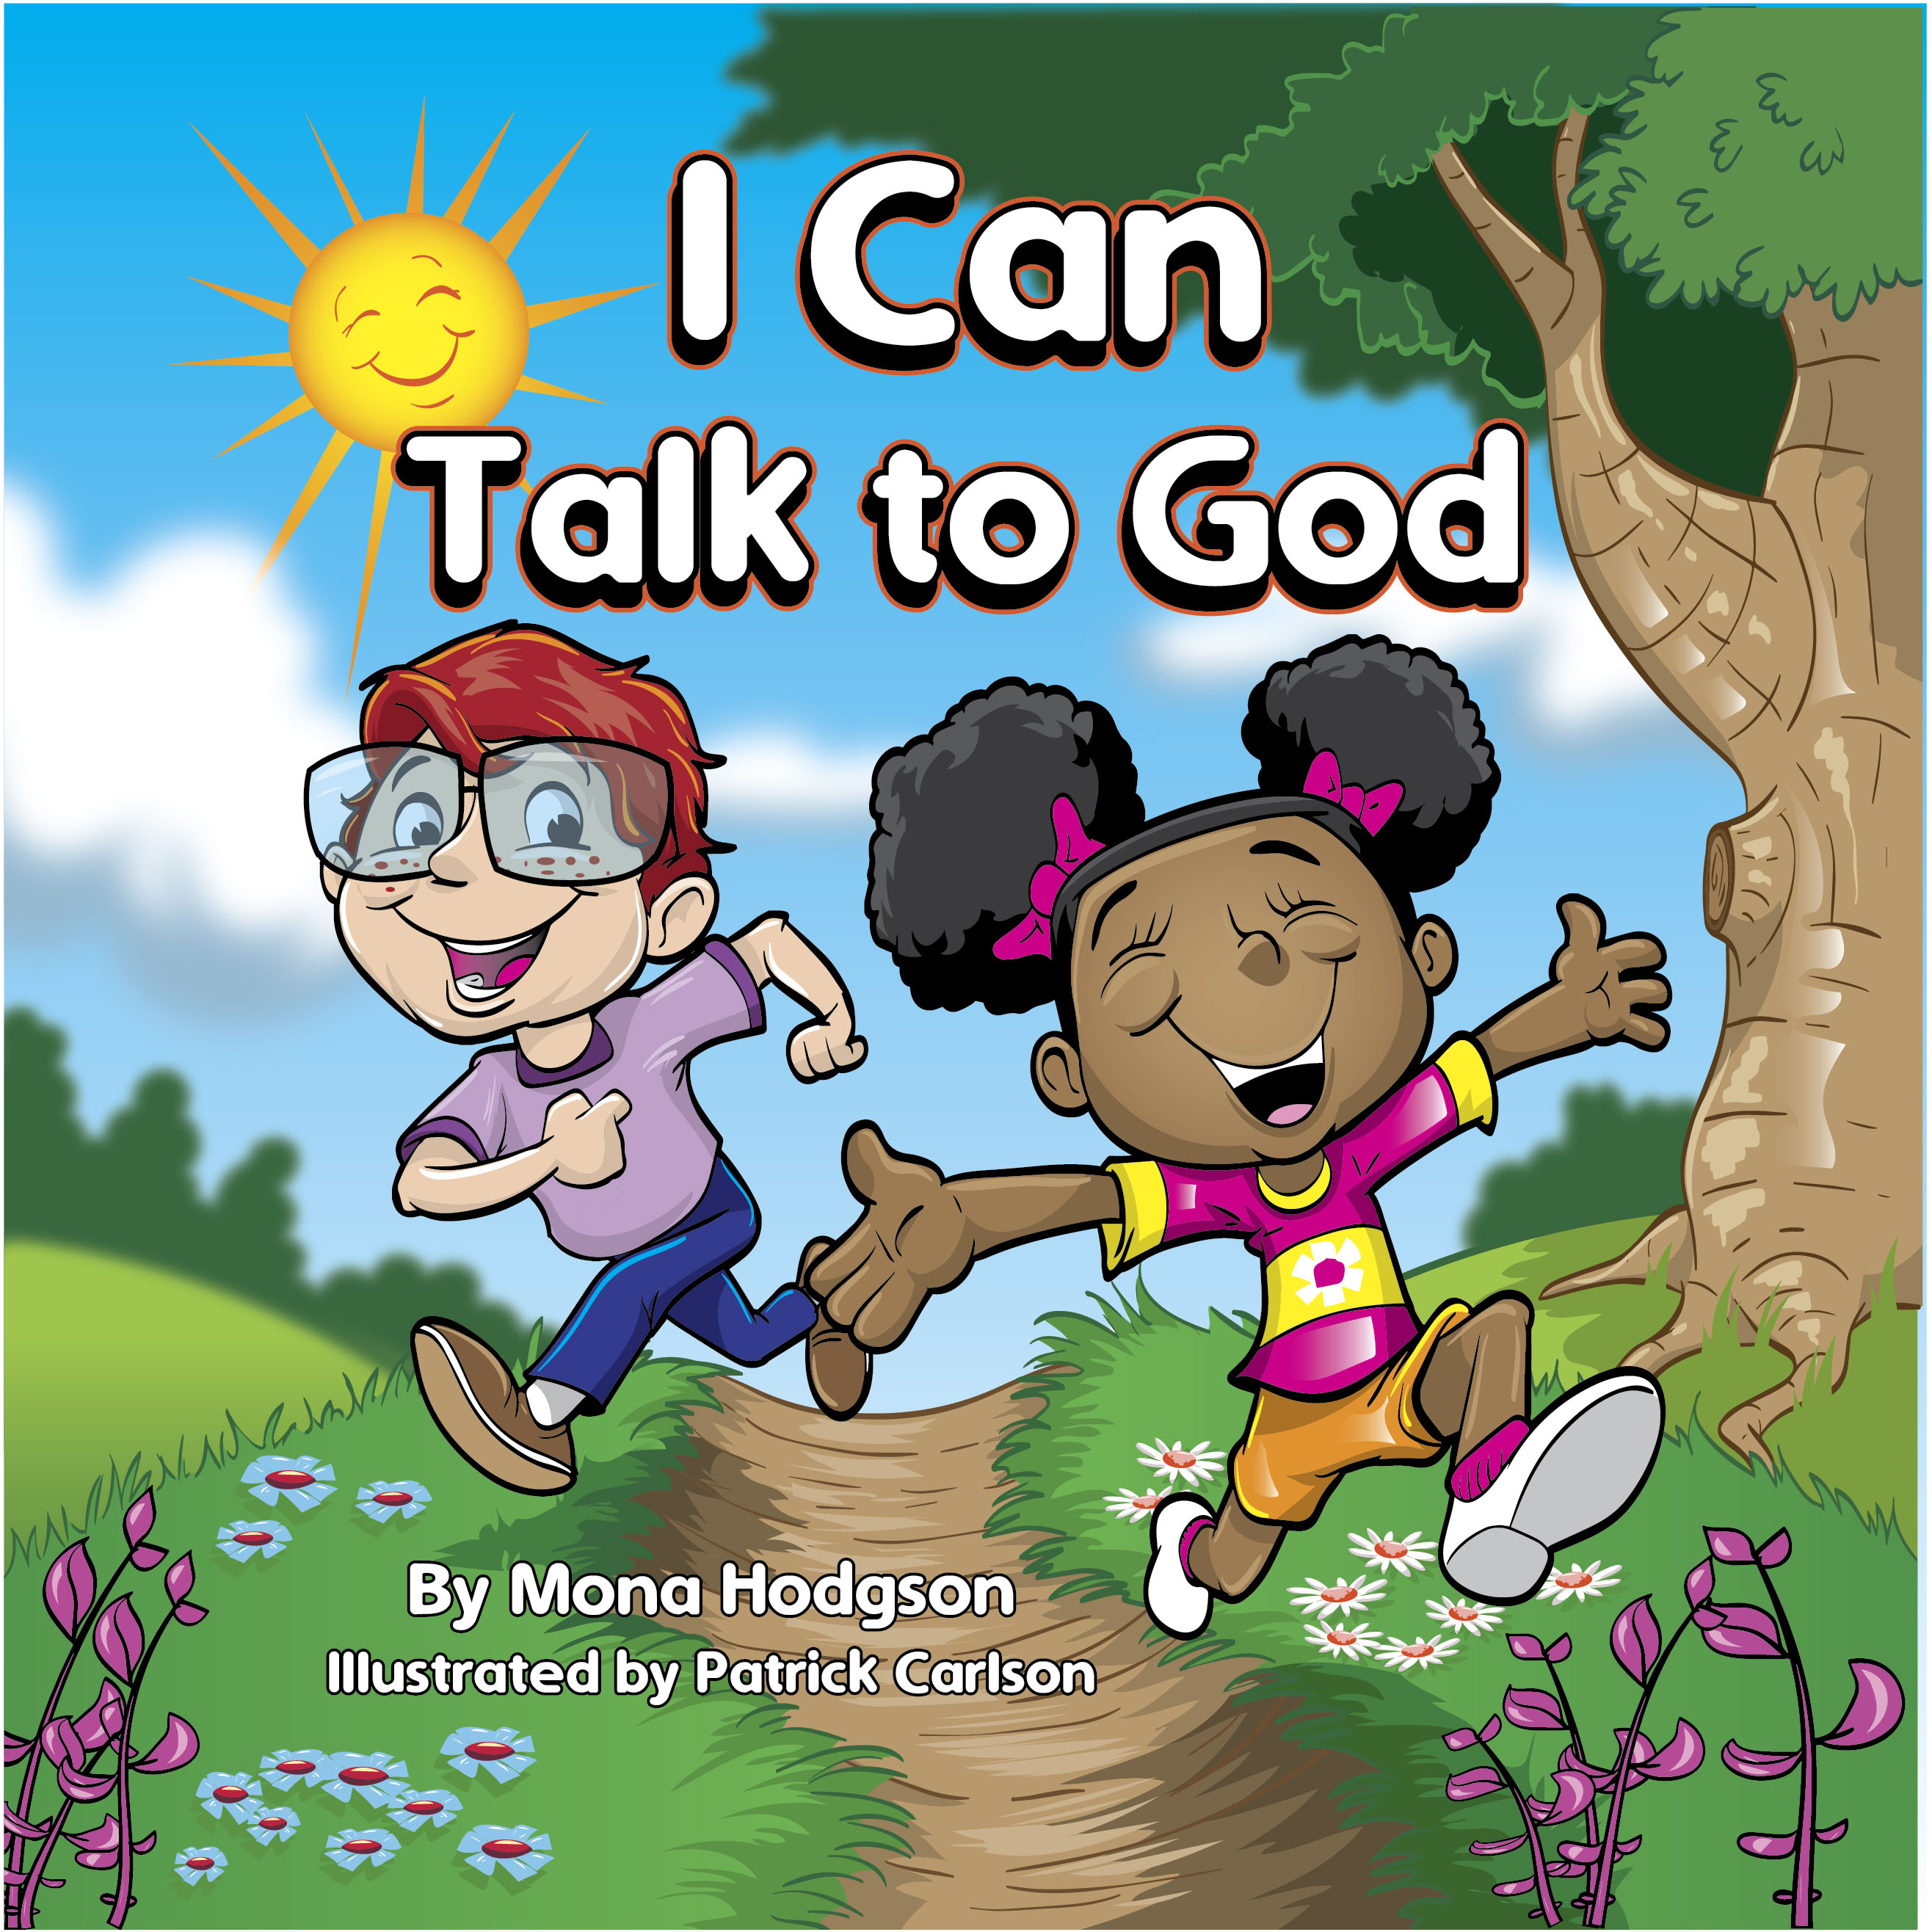 I Can Talk to God